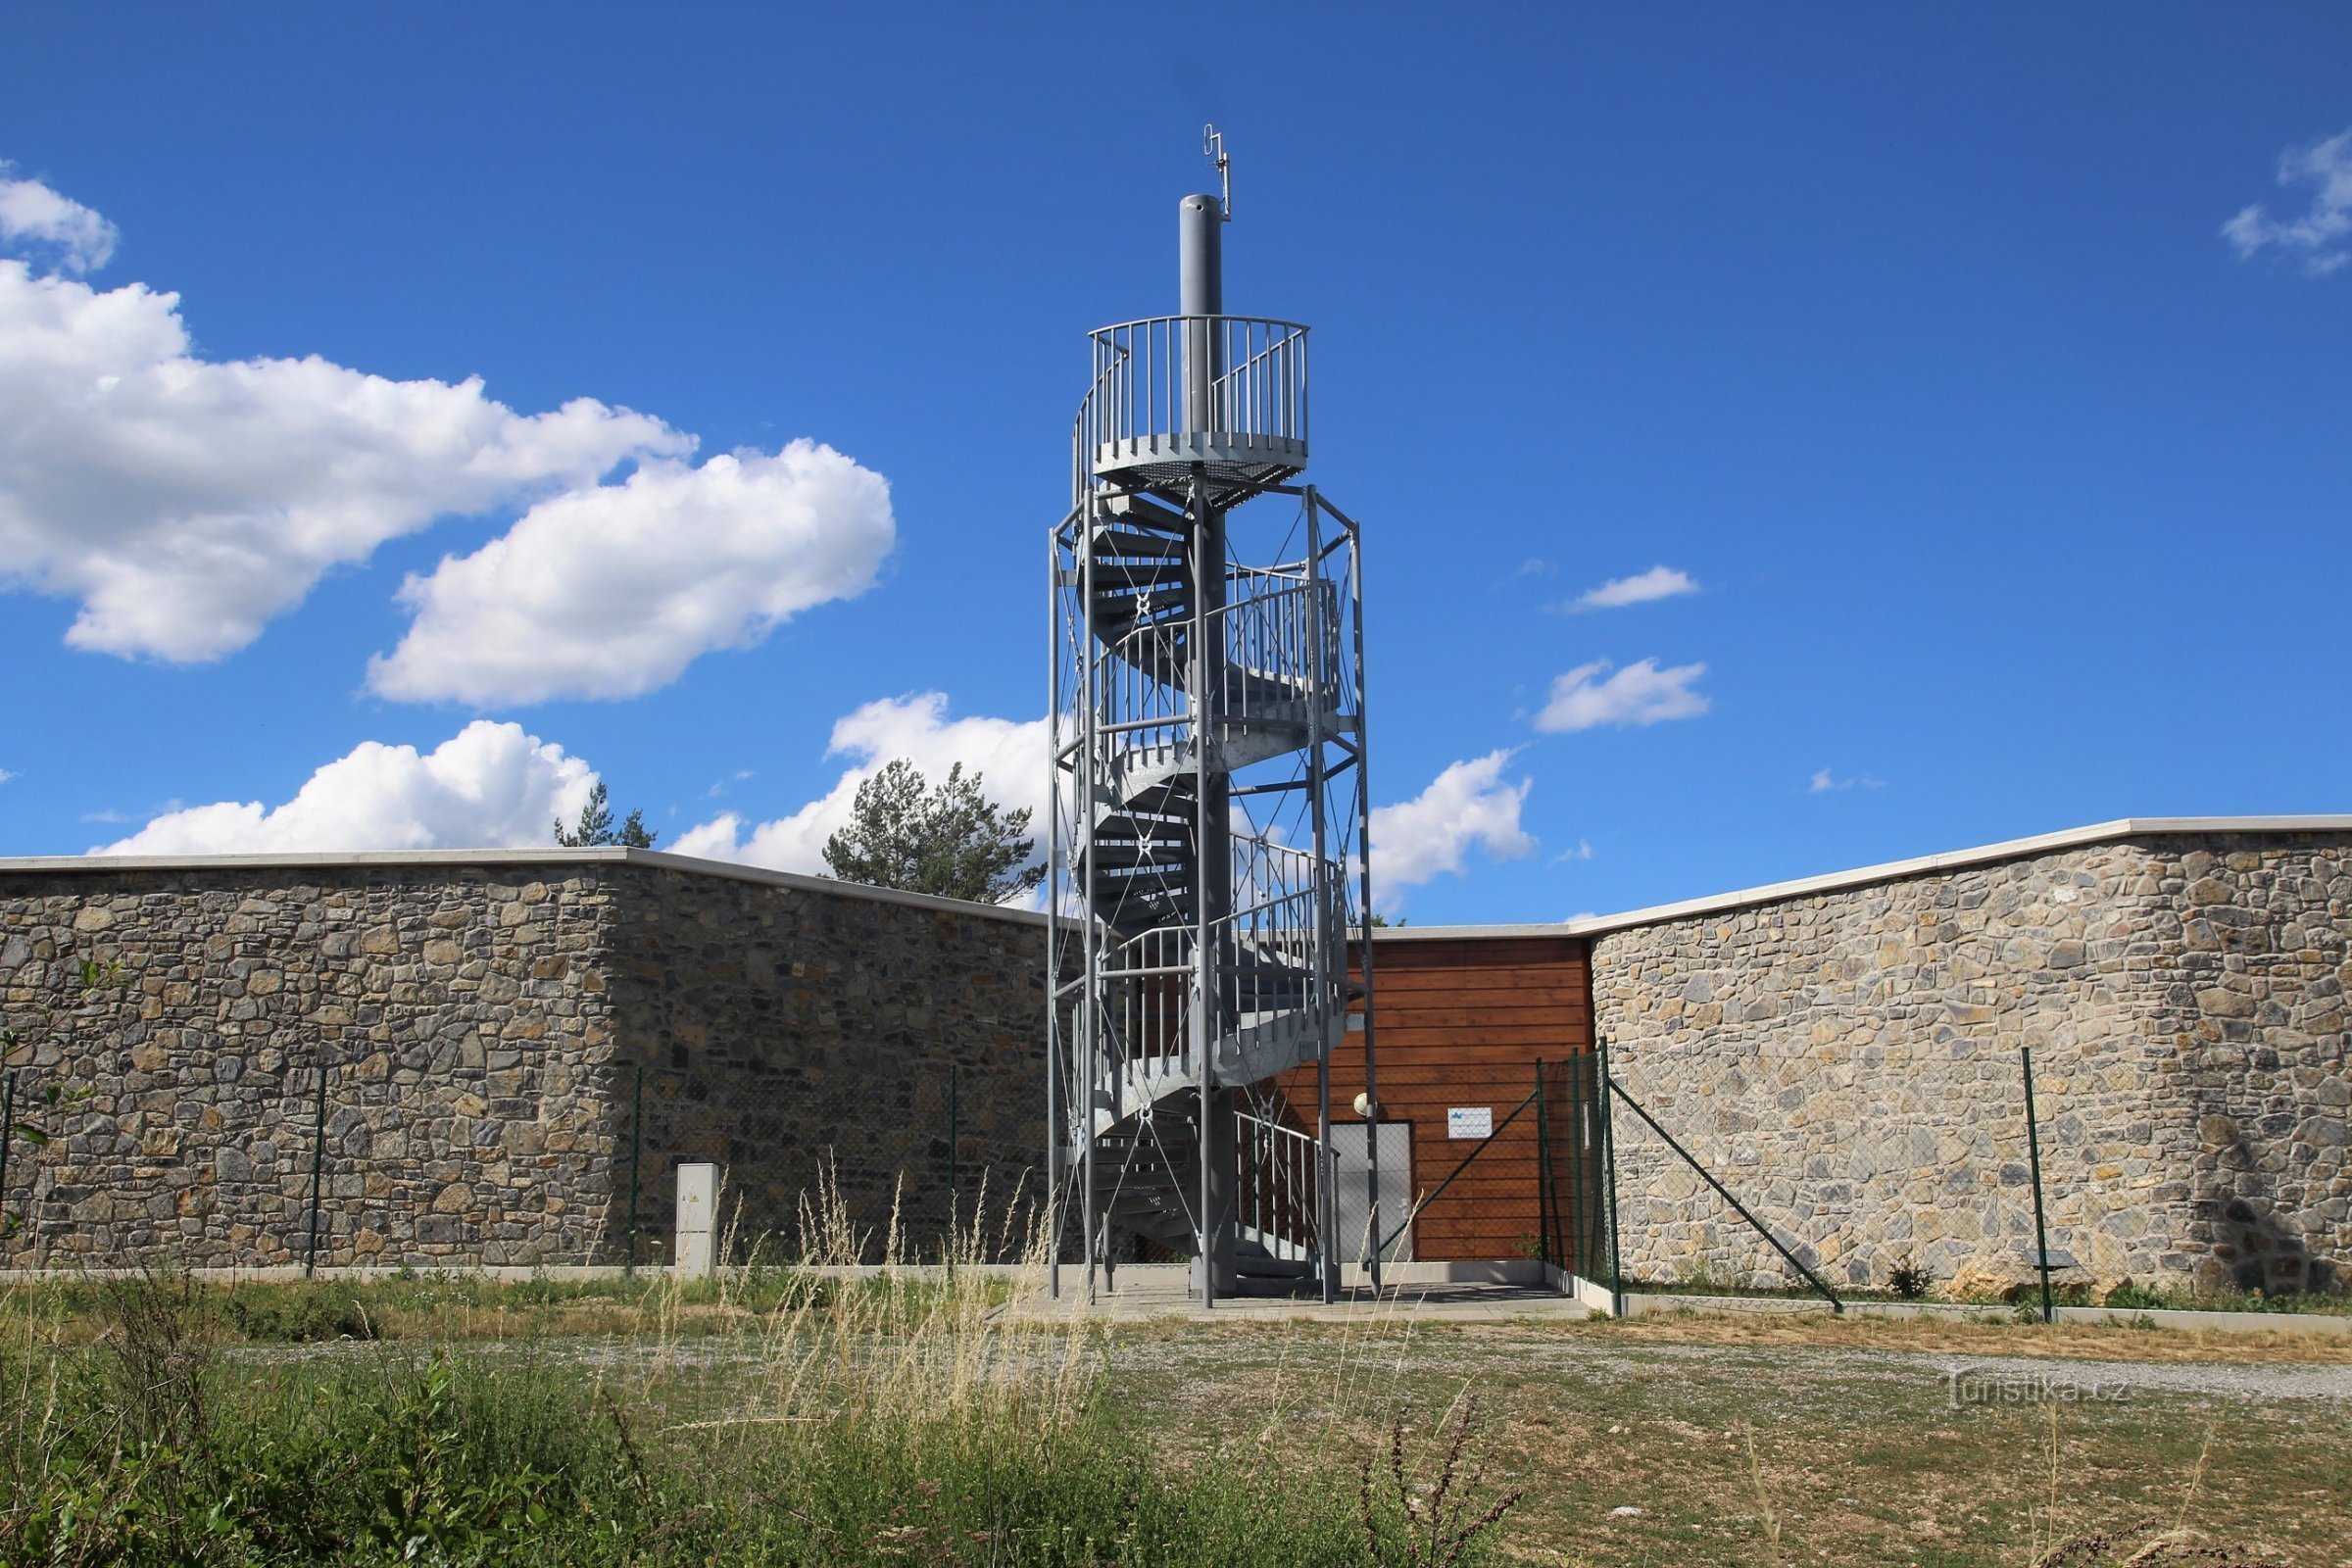 The Mokerská lookout tower is located at the top of the hill above the village in the forecourt of the local reservoir